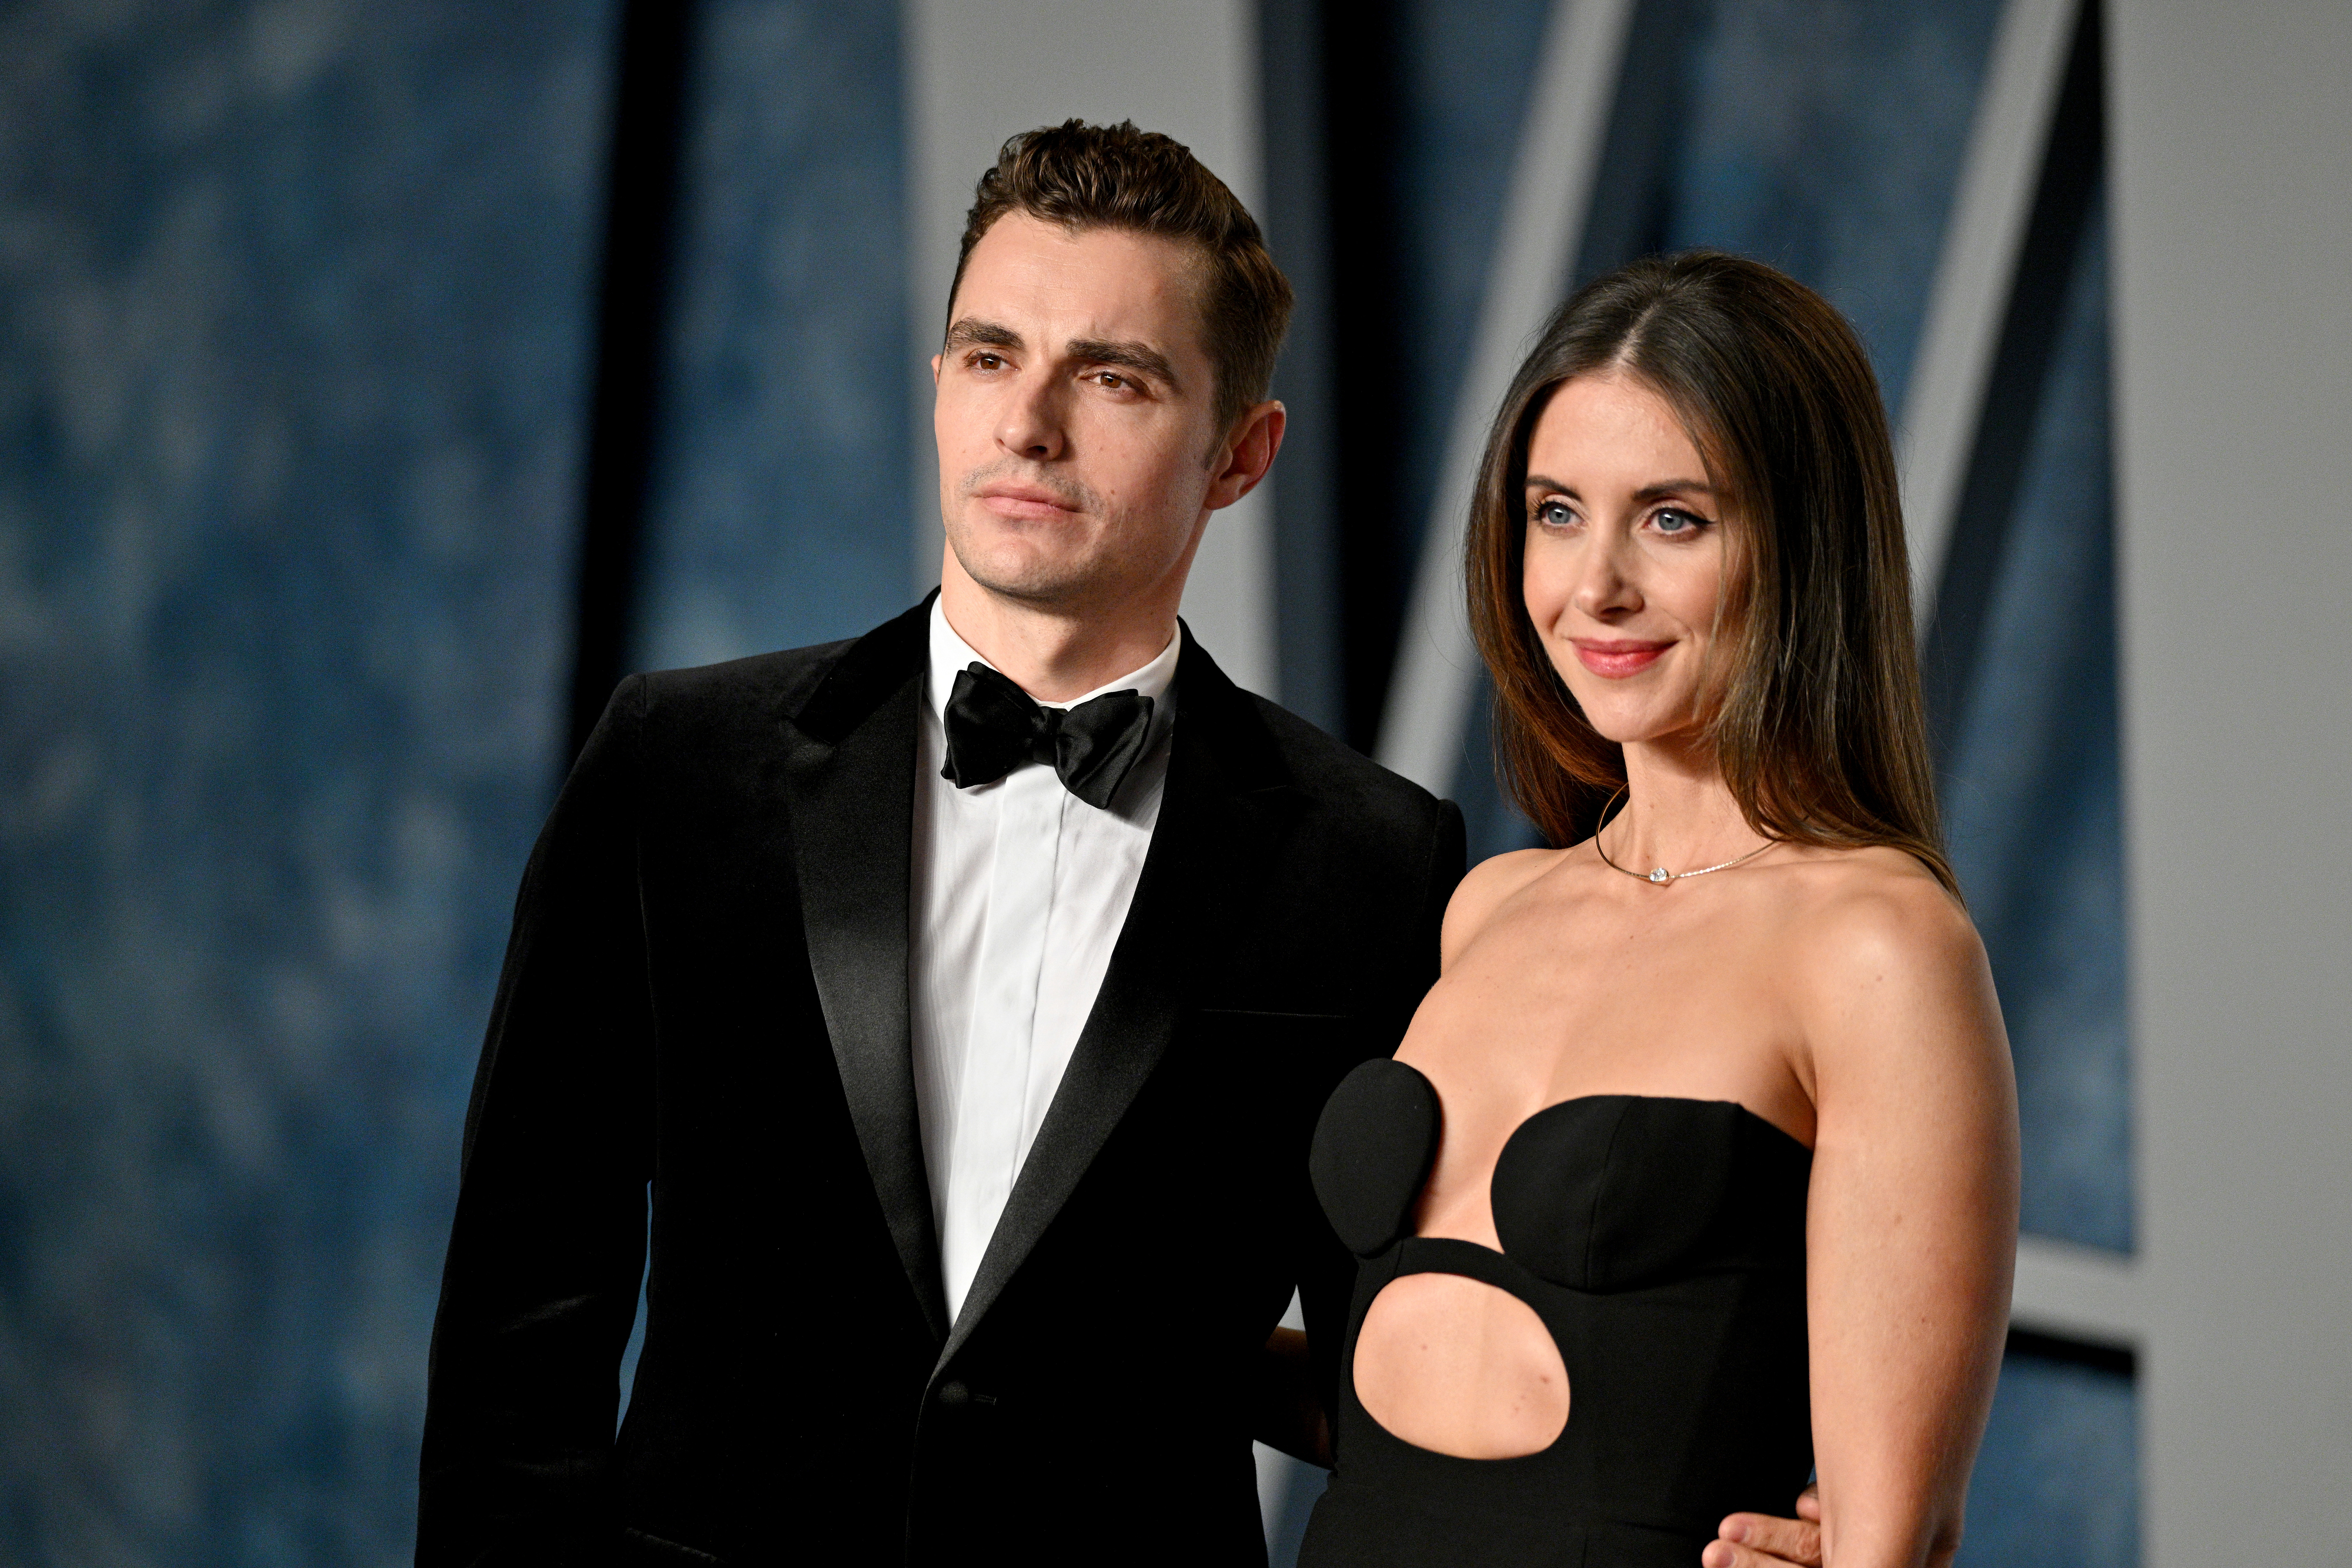 Dave Franco and Alison Brie on the red carpet